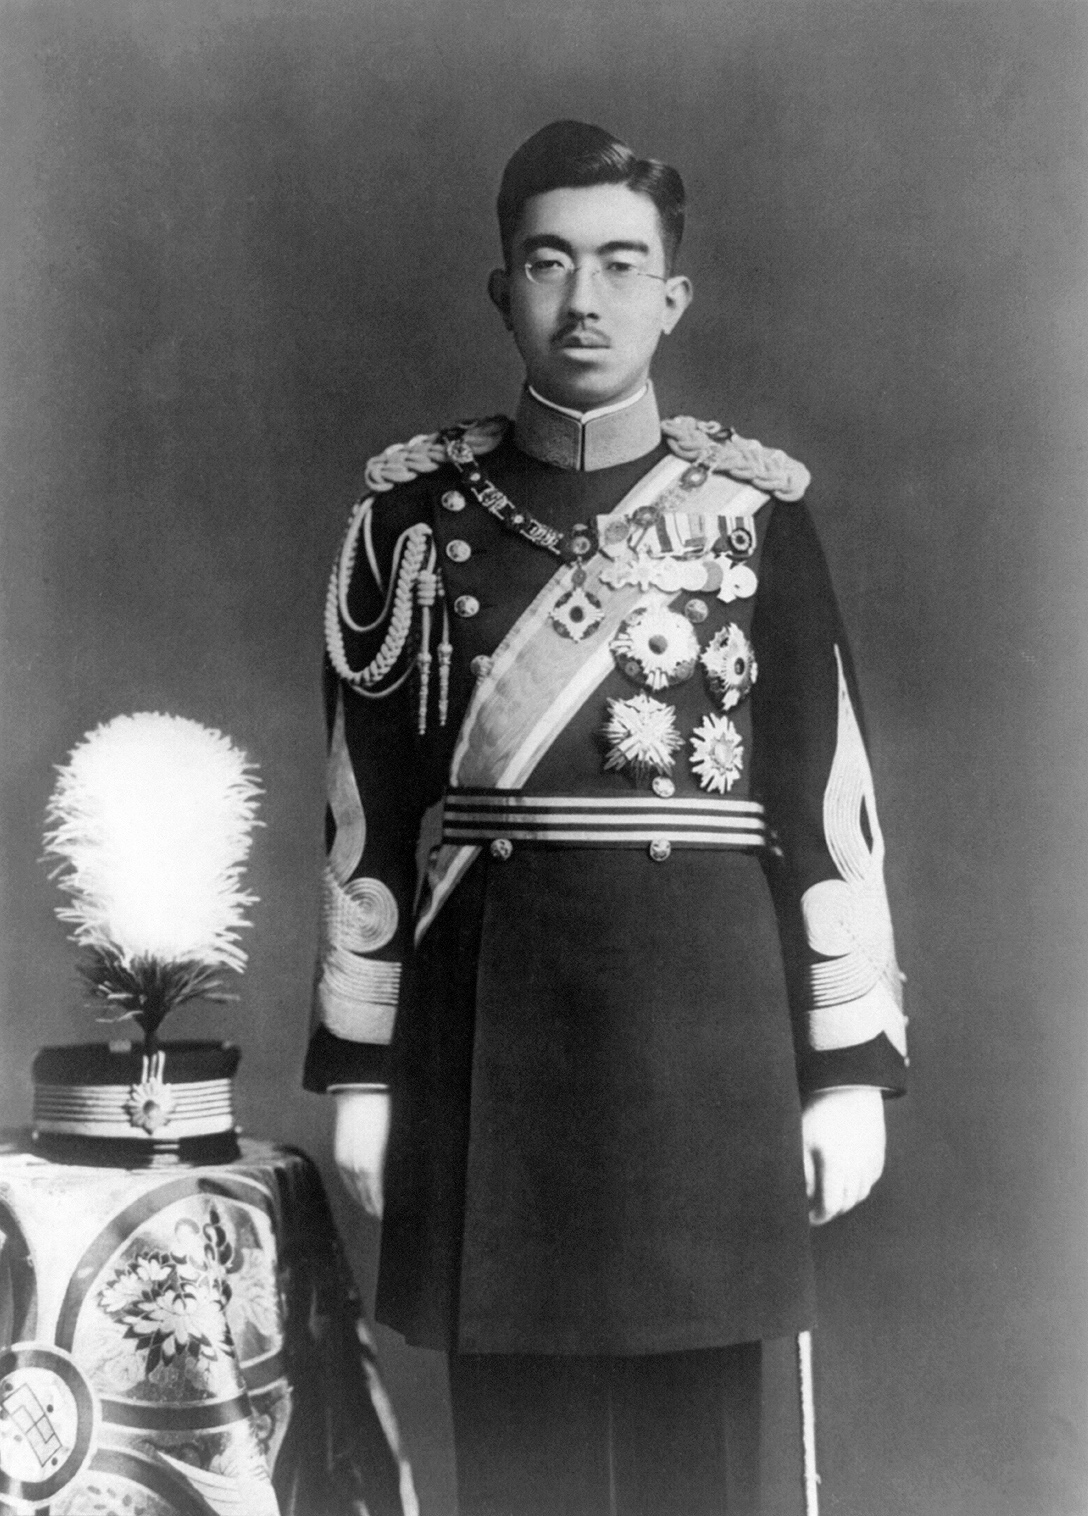 Emperor Hirohito ruled Japan from 1901 - 1989, but his powers were severely curtailed after World War II.